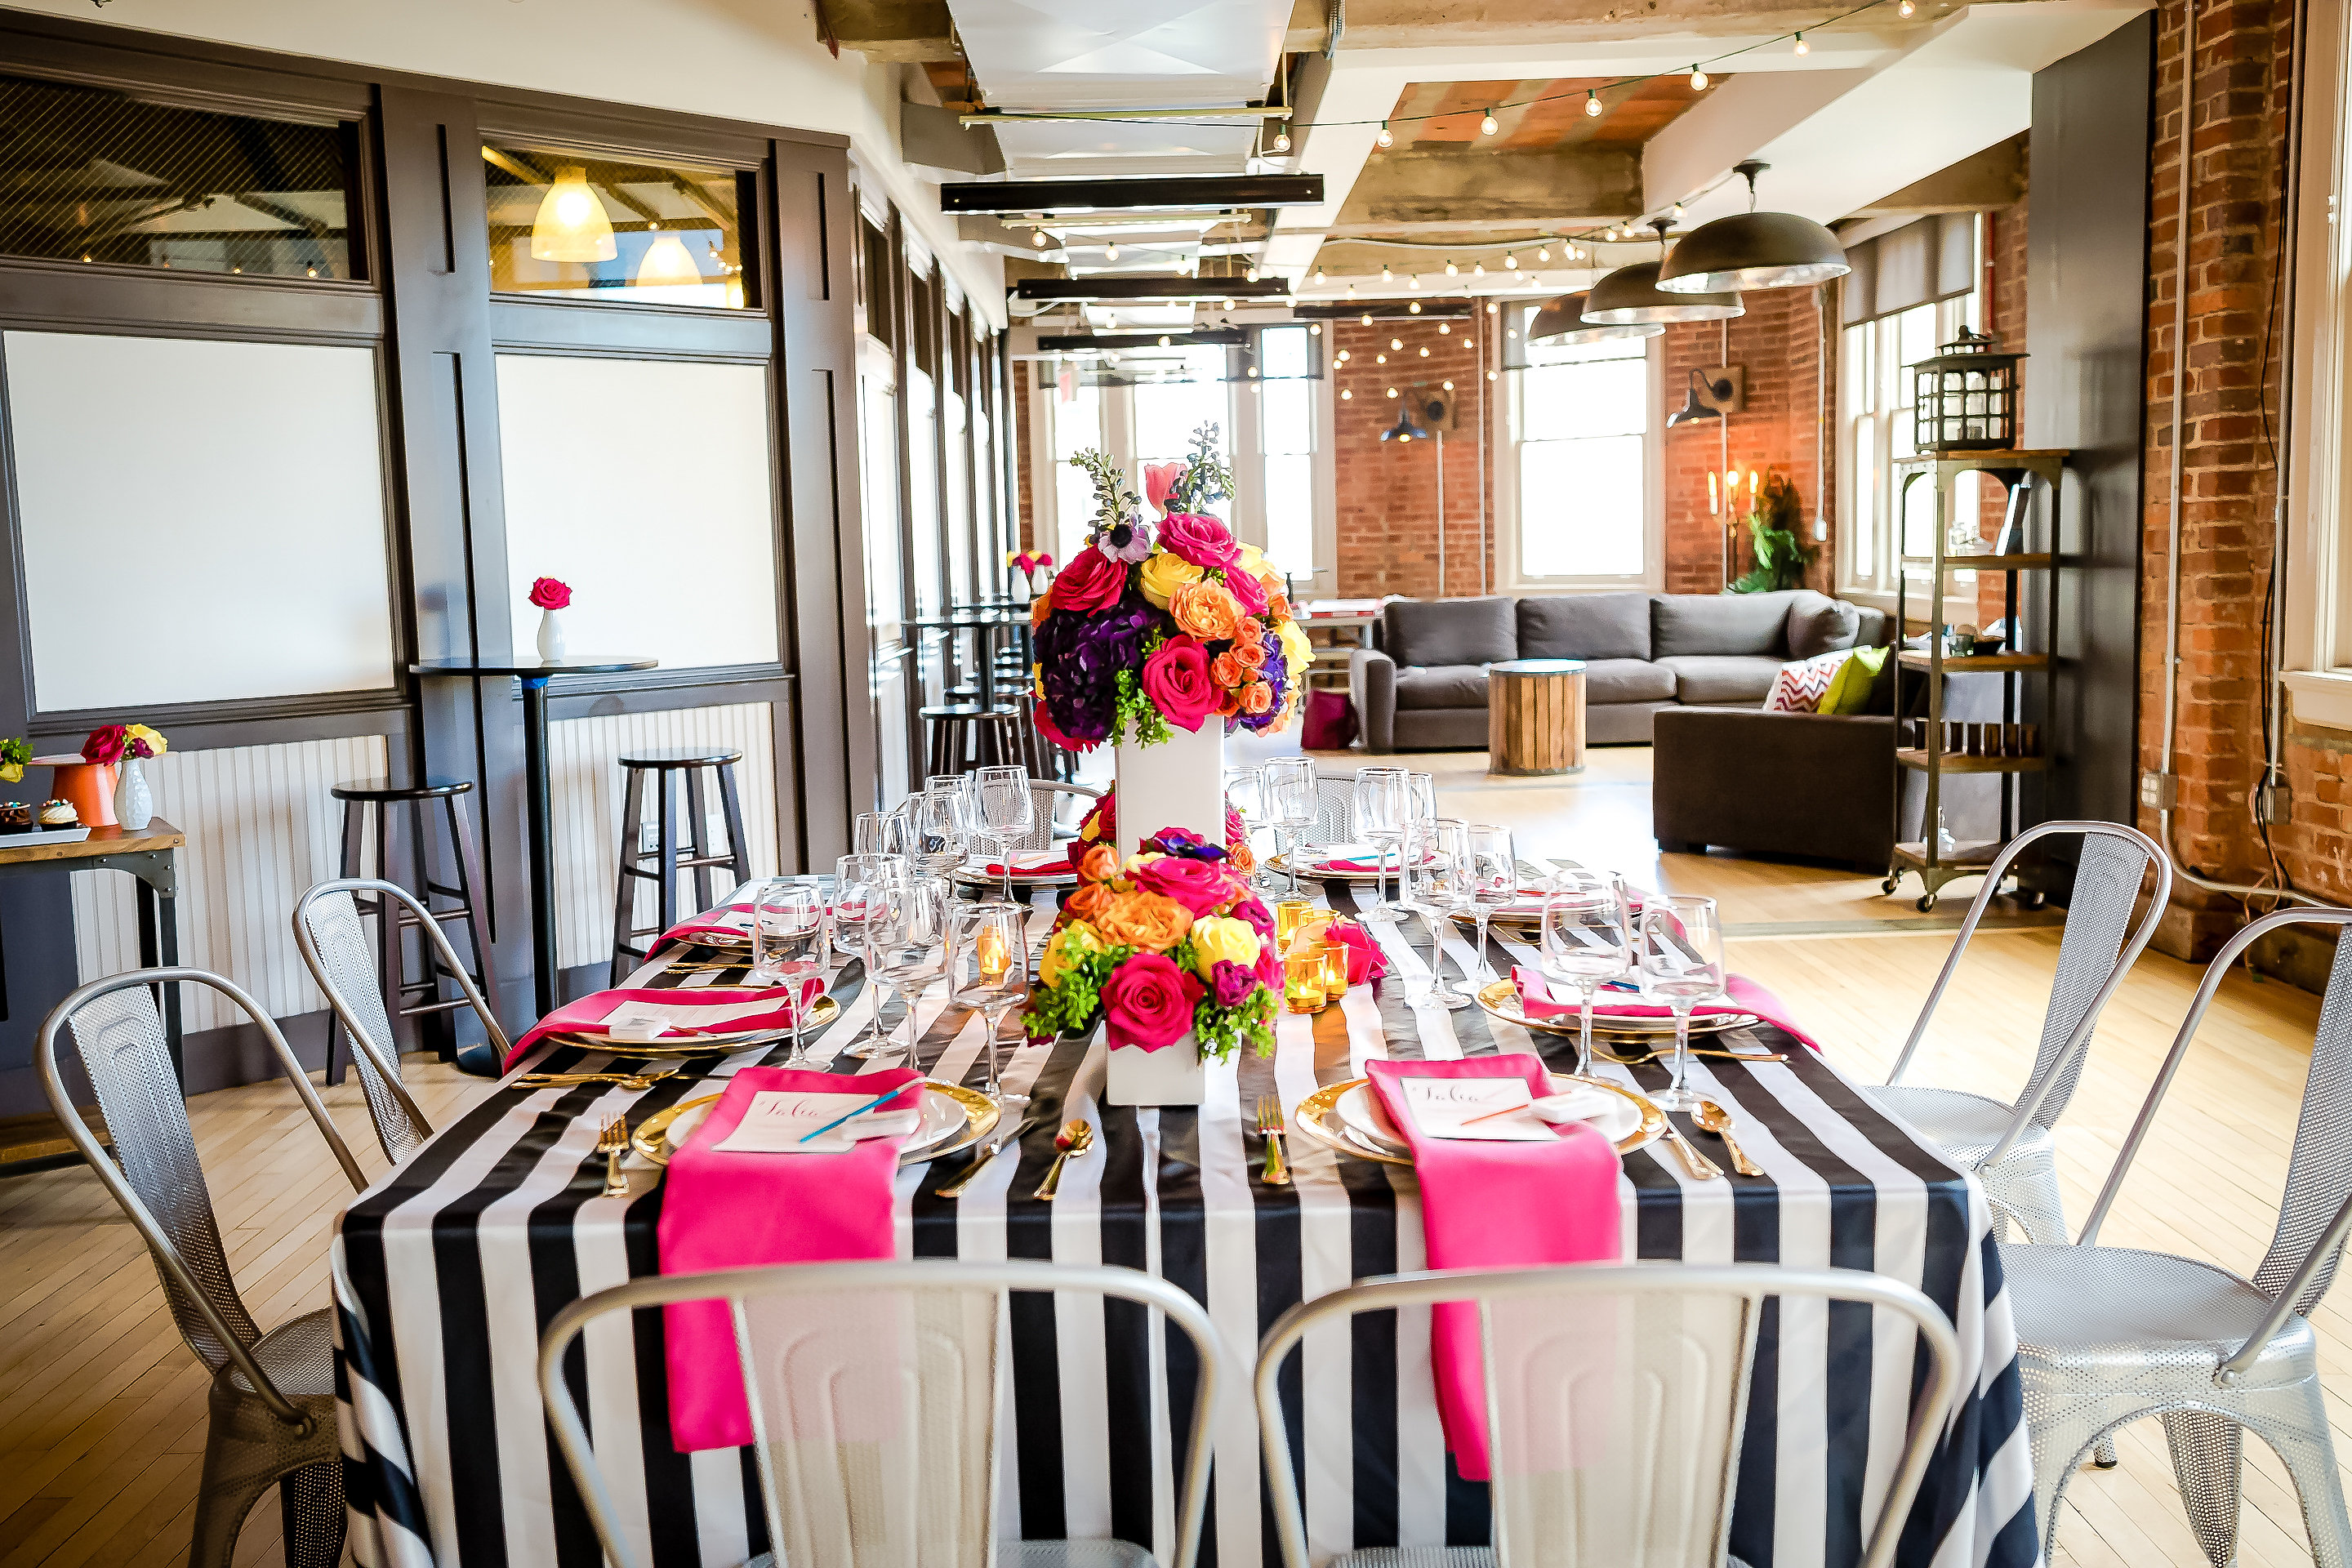 Floral and Art Bat Mitzvah at the Loft at 600F in Washington DC | Pop Color Events | Adding a Pop of Color to Bar & Bat Mitzvahs in DC, MD & VA | Photo by Powell Woulfe Photography